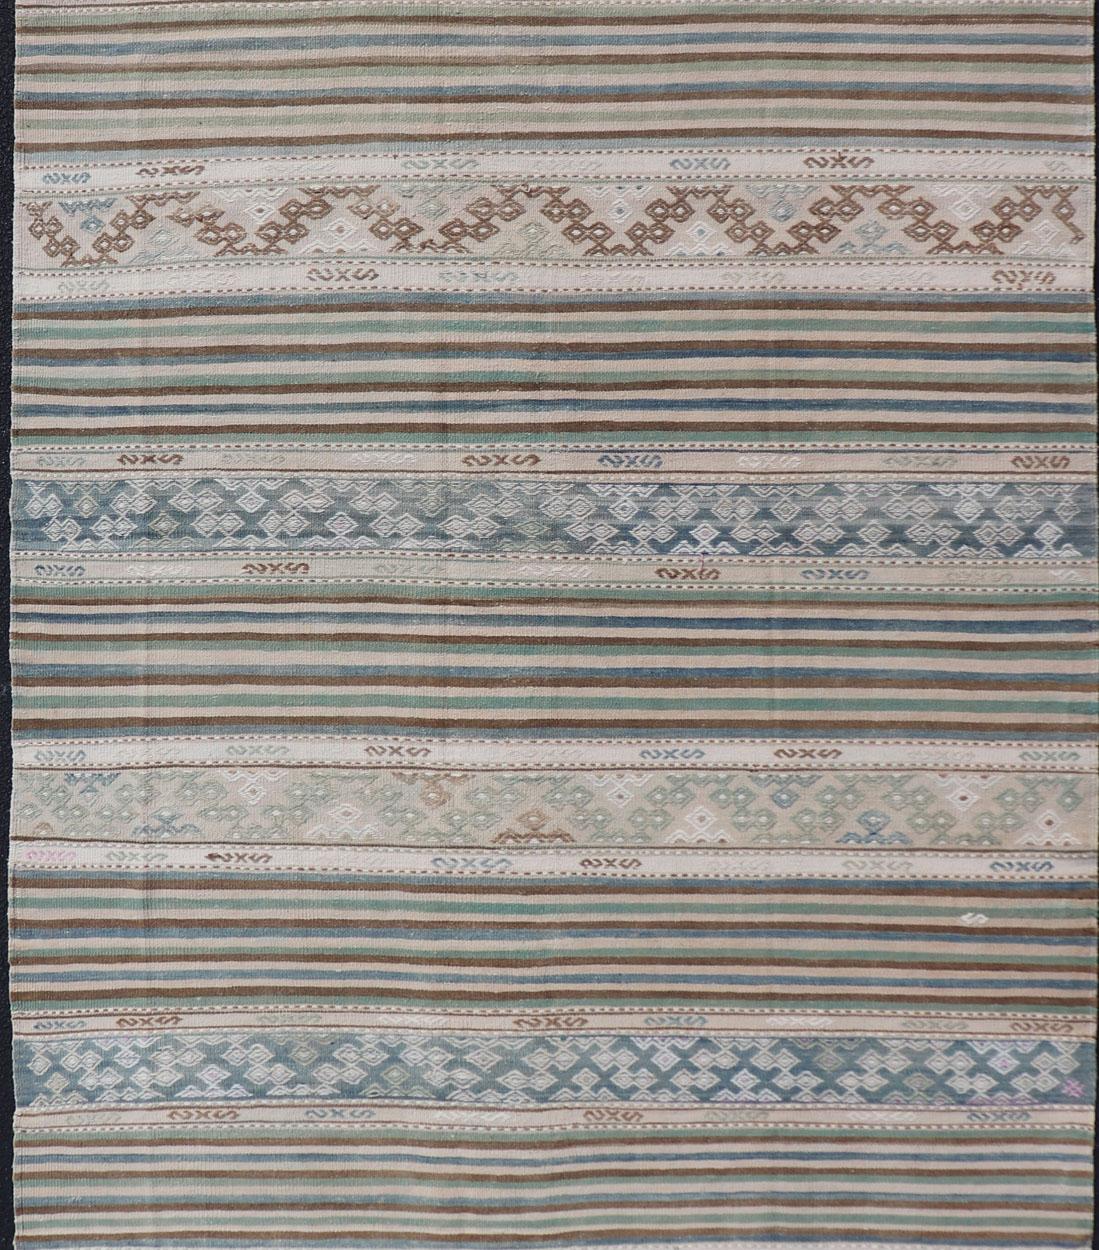 Wool Turkish Flat-Weave Kilim with Stripes and Embroideries In Blue, Green, and Cream For Sale